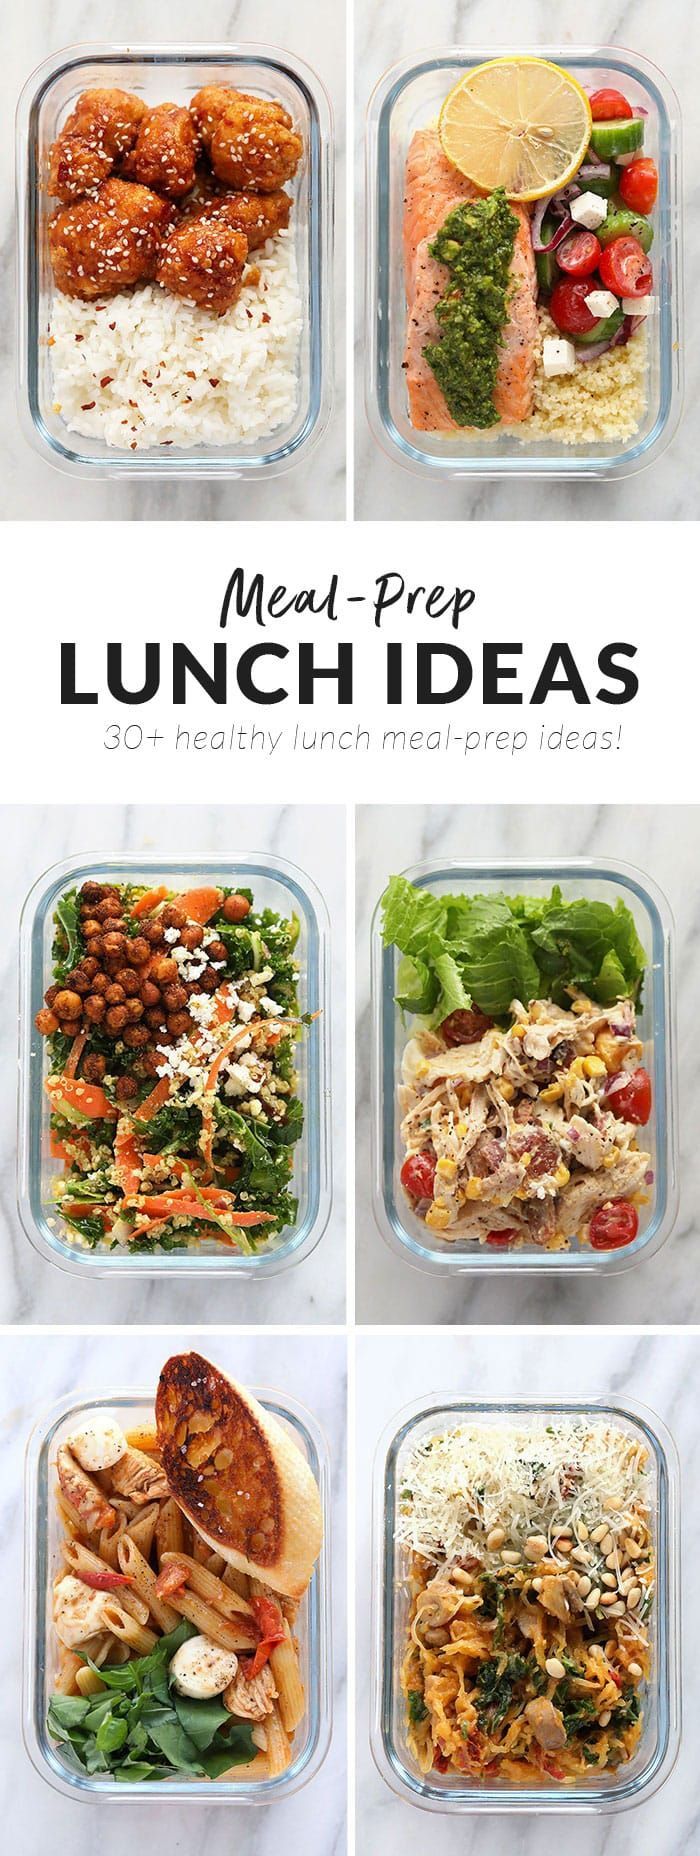 Delicious Healthy Lunch Ideas (30+ Meal Prep Ideas) - Fit Foodie Finds - Delicious Healthy Lunch Ideas (30+ Meal Prep Ideas) - Fit Foodie Finds -   18 meal prep recipes vegetarian lunch ideas